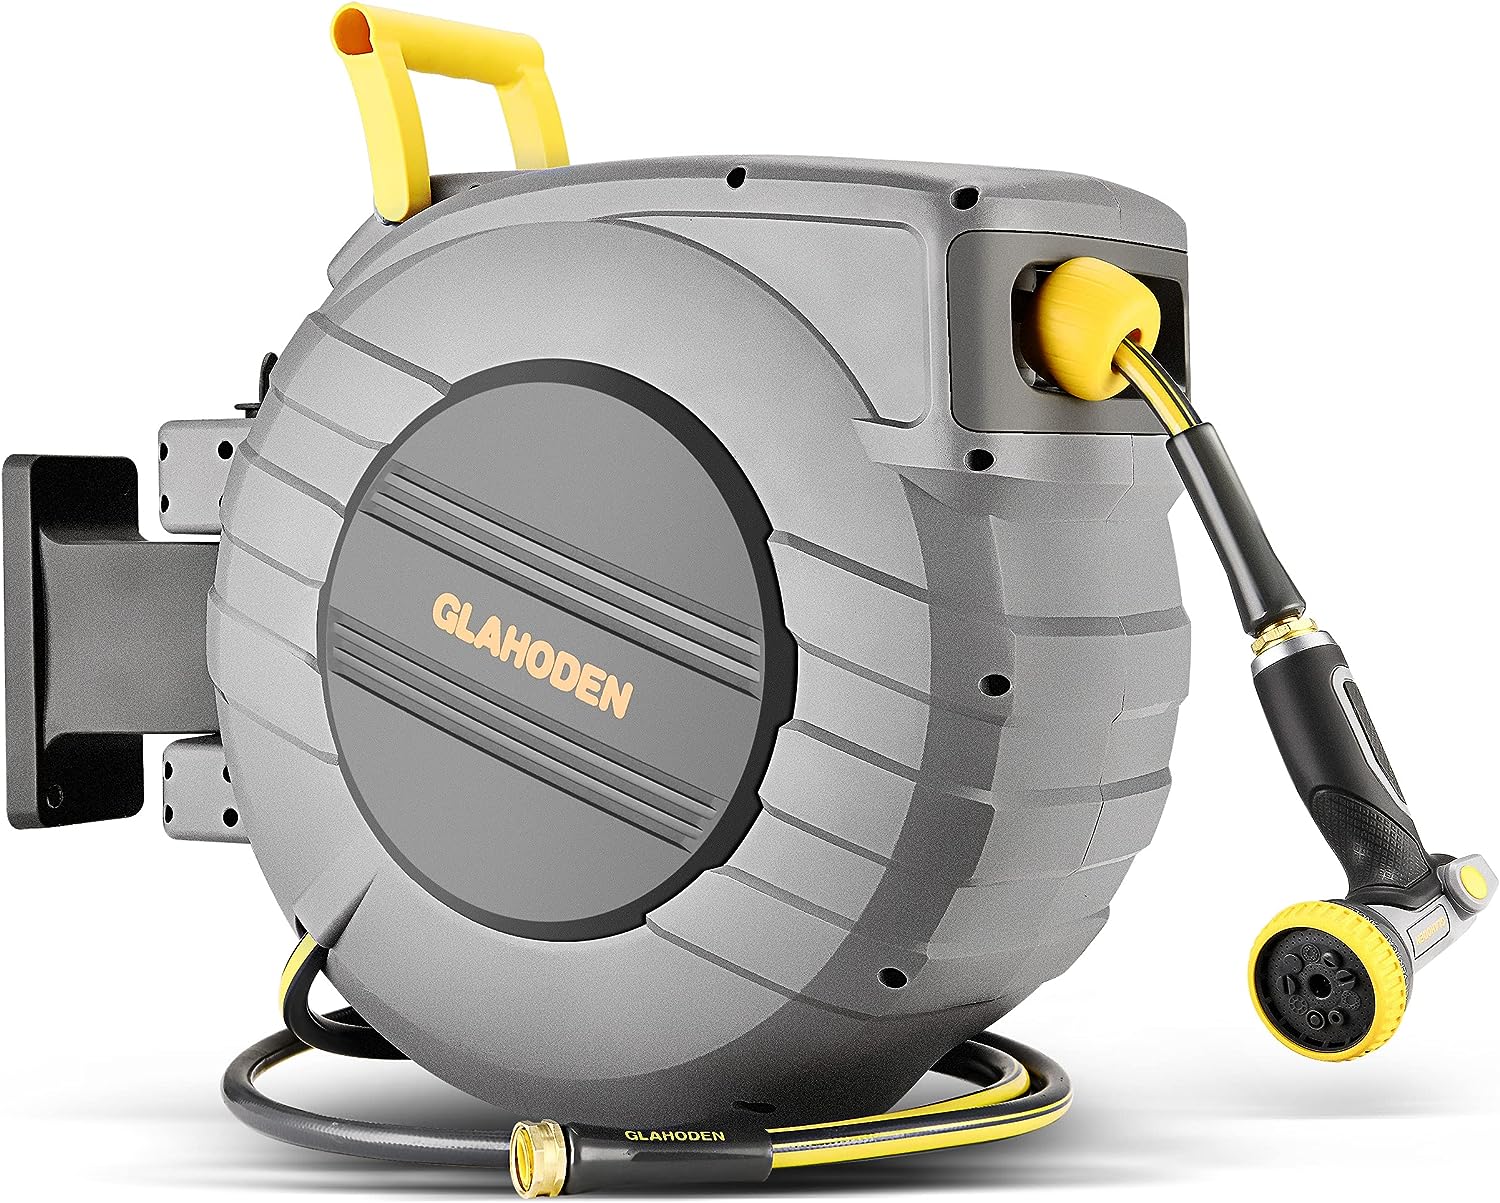 https://bigbigmart.com/wp-content/uploads/2023/09/GLAHODEN-Retractable-Garden-Hose-Reel-5-8in-x-100ft6ft-2-Year-Anti-fading-Water-Hose-Reel-Patented-Design-for-Any-Length-Lock-Slow-Return-System-Increase-Flow-Rate-By-20-Hose-Reel-Wall-Mount.jpg